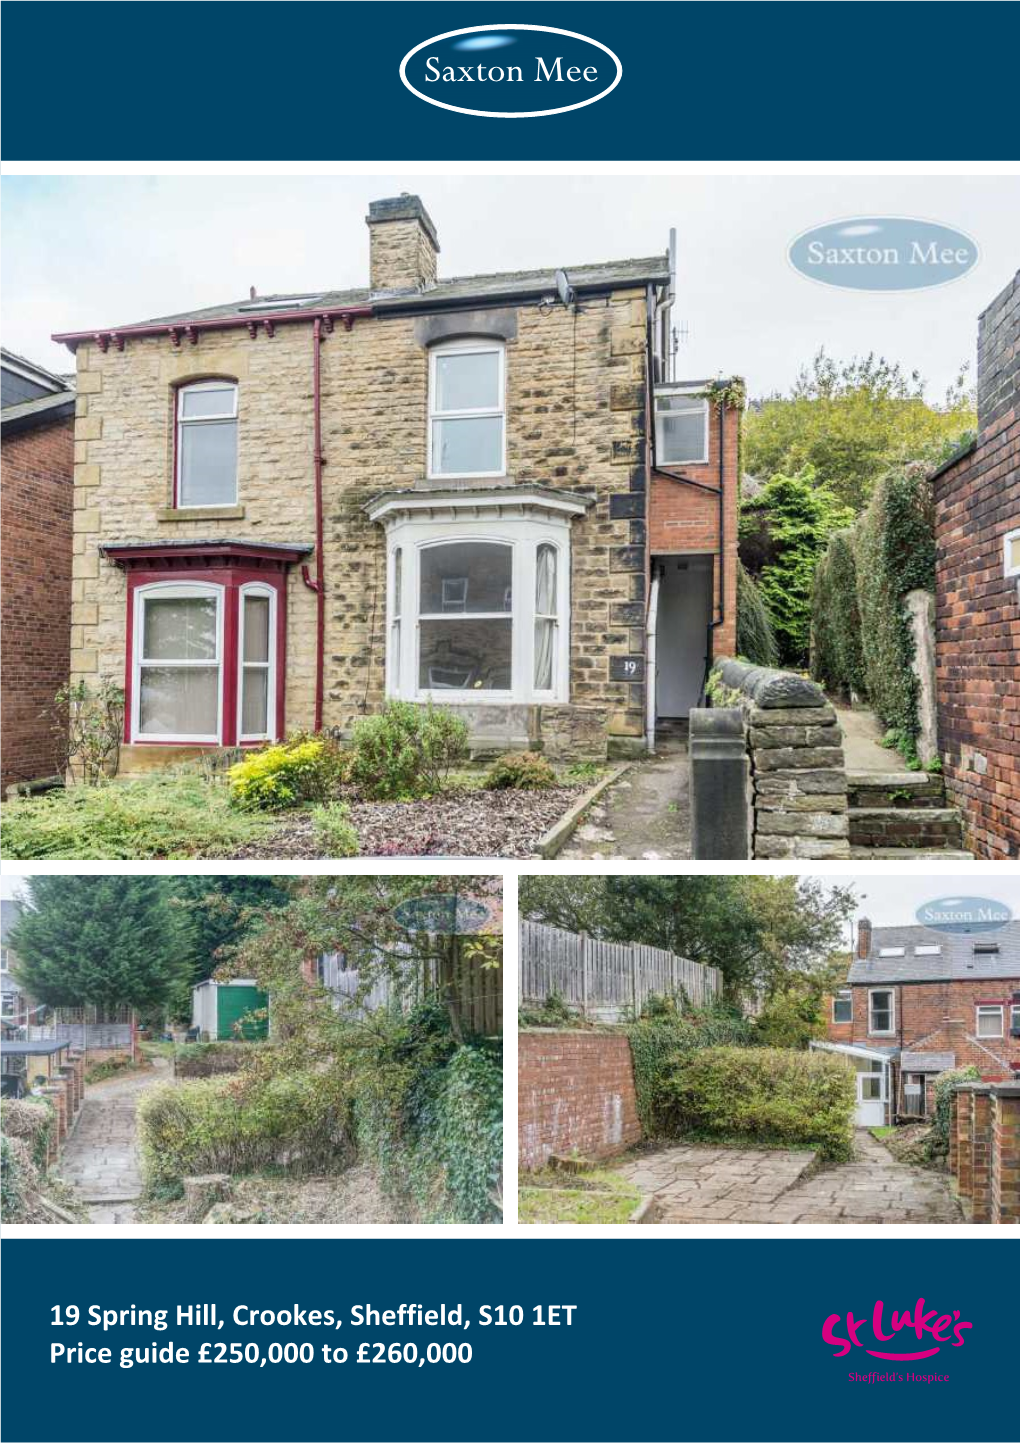 19 Spring Hill, Crookes, Sheffield, S10 1ET Price Guide £250,000 to £260,000 She Ield’S Hospice 19 Spring Hill Crookes Price Guide £250,000 to £260,000